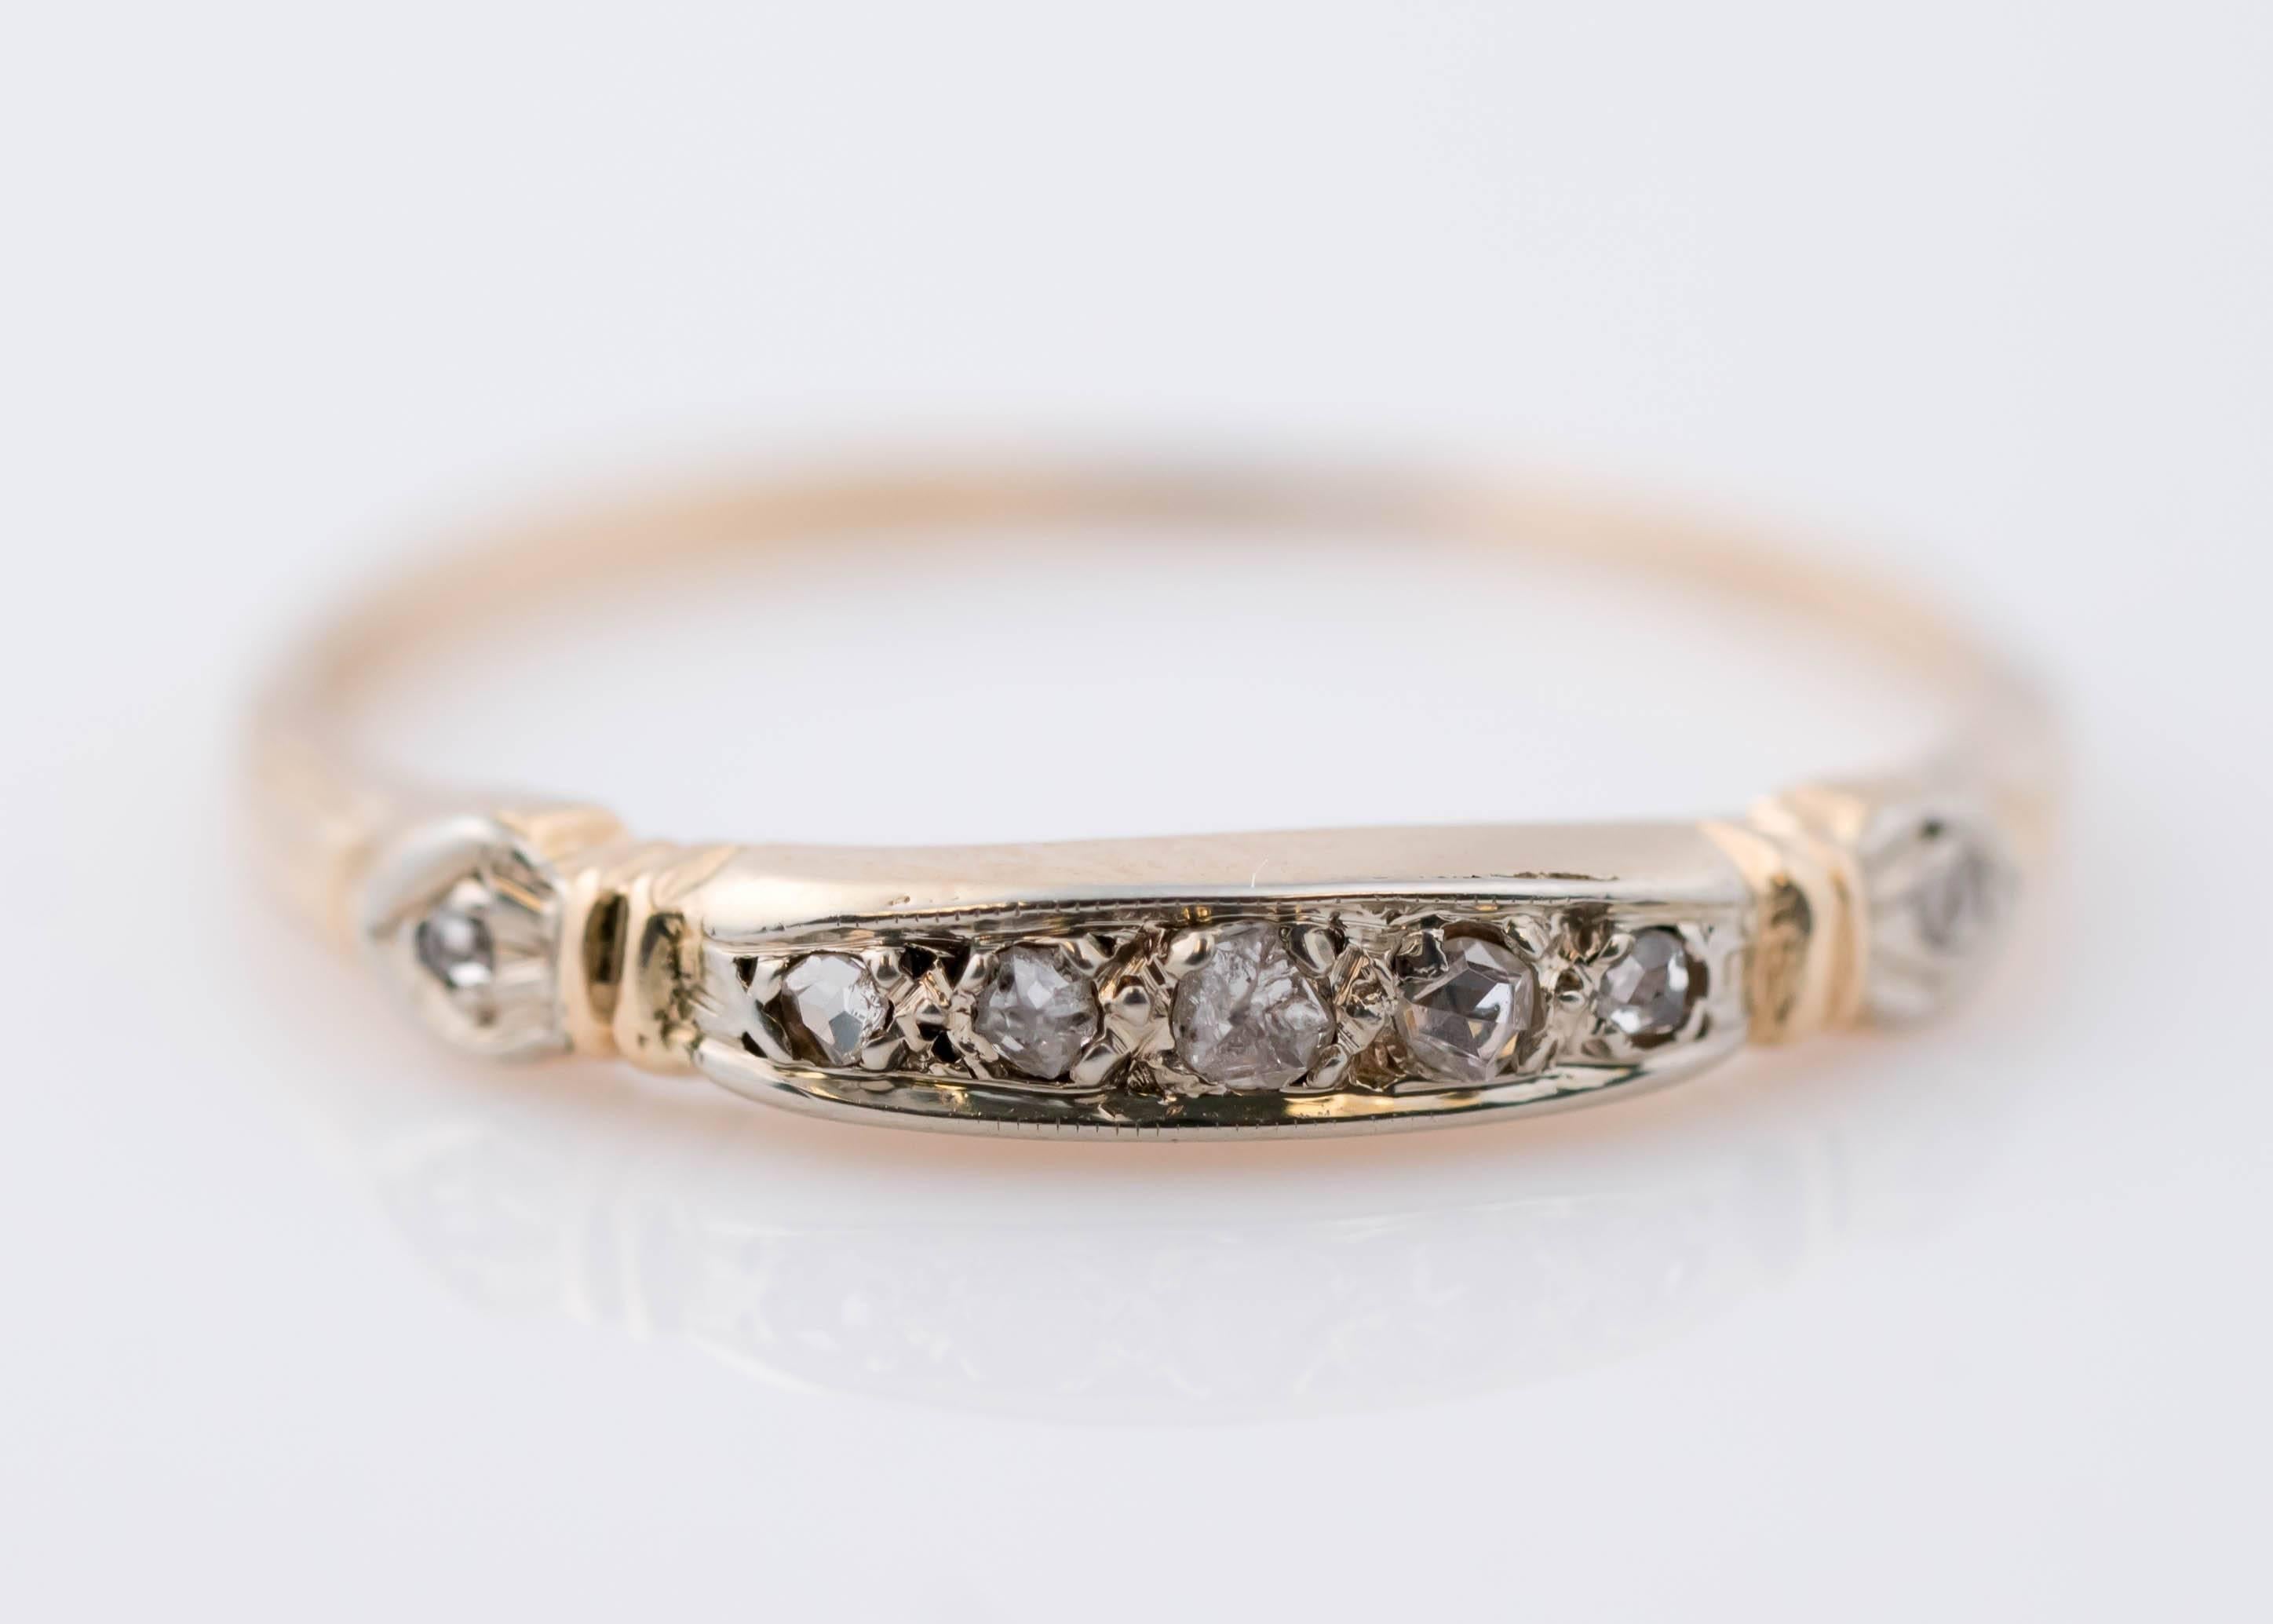 1900s Edwardian Wedding Band Ring - 14 Karat Yellow and White Gold, Rose Cut Diamonds
Features a 14 karat yellow gold shank and a 14 karat white gold head embracing .10 carats of Rose cut Diamonds. 
This dainty ring has a symmetrical and delicate